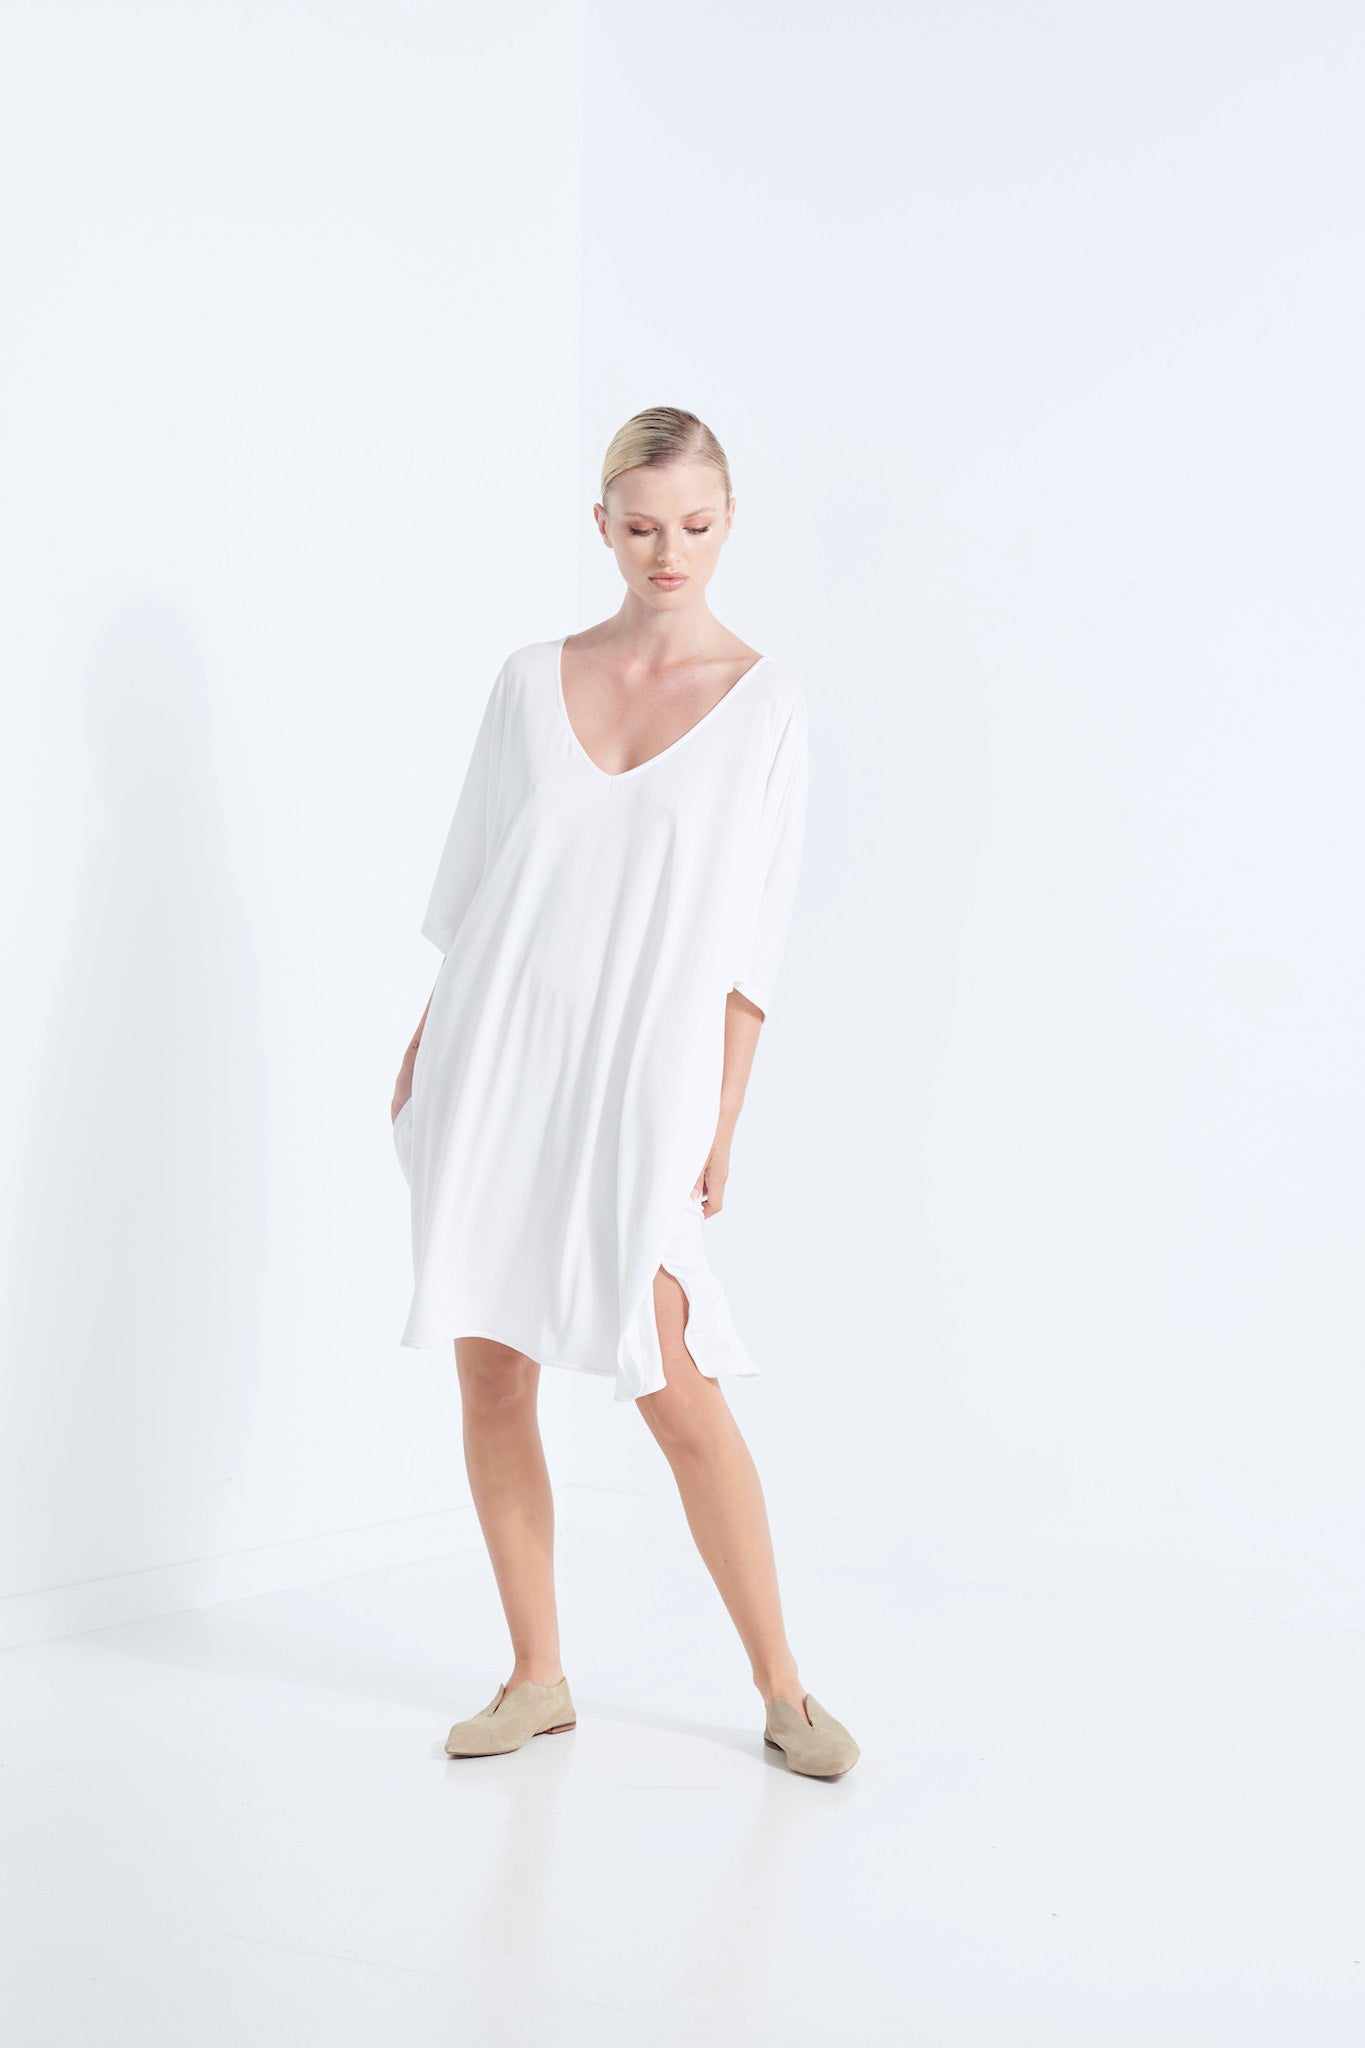 THEMIS DRESS LONGLINE T-SHIRT BEECHWOOD MODAL STRETCH WITH REMOVABLE TIE DEW MILKY WHITE FRONT VIEW